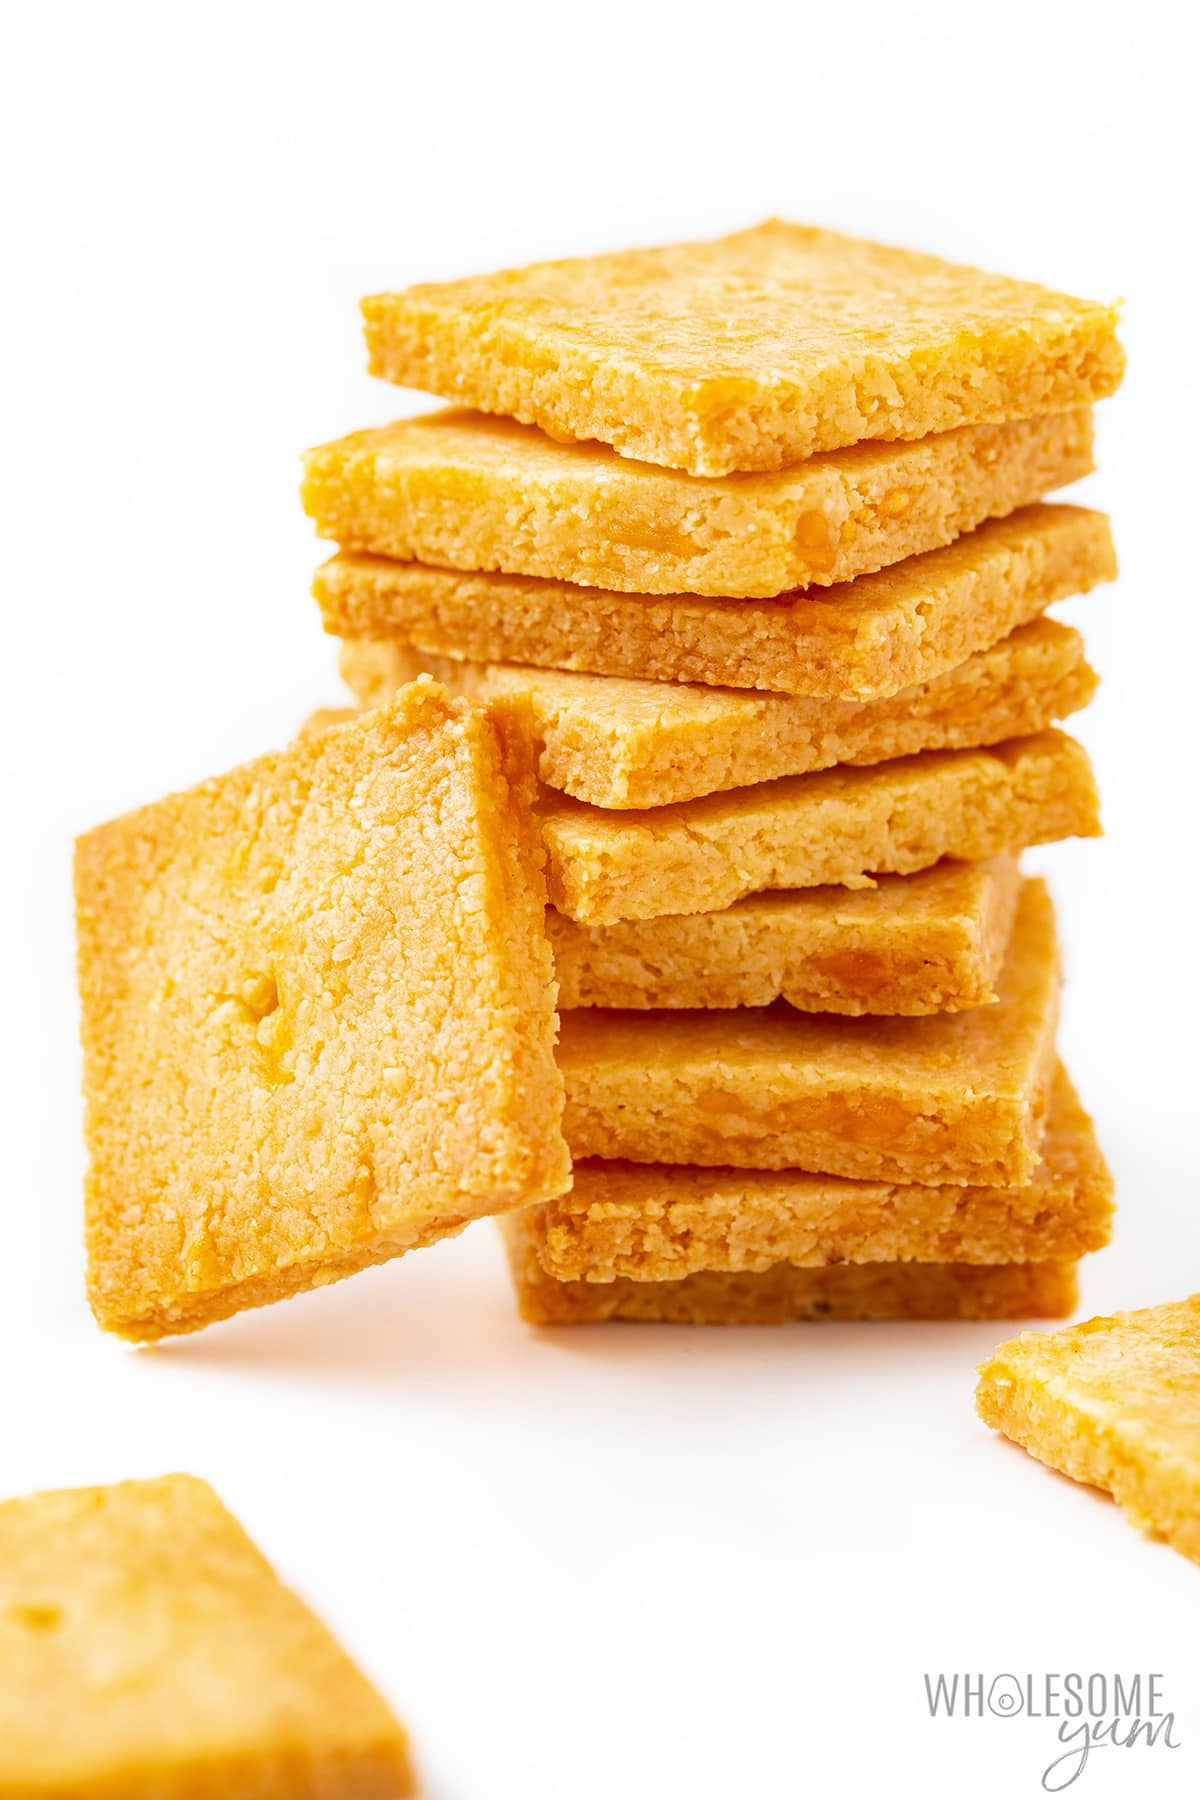 Cheese crackers stacked with others laying beside the stack.